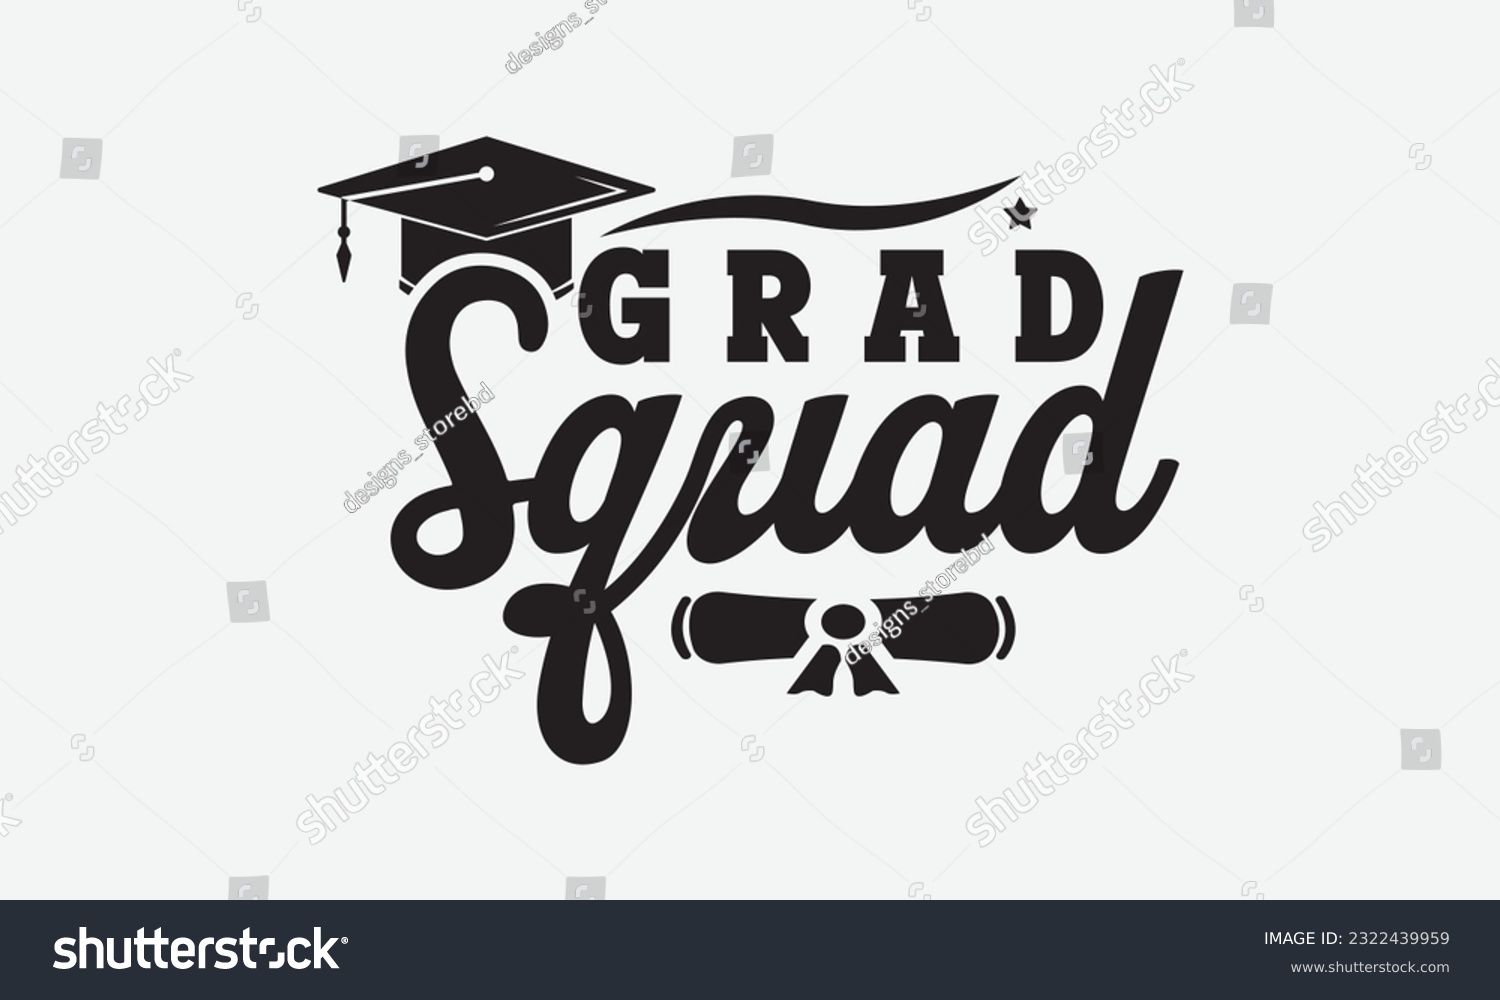 SVG of Grad squad svg, Graduation SVG , Class of 2023 Graduation SVG Bundle, Graduation cap svg, T shirt Calligraphy phrase for Christmas, Hand drawn lettering for Xmas greetings cards, invitations, Good for svg